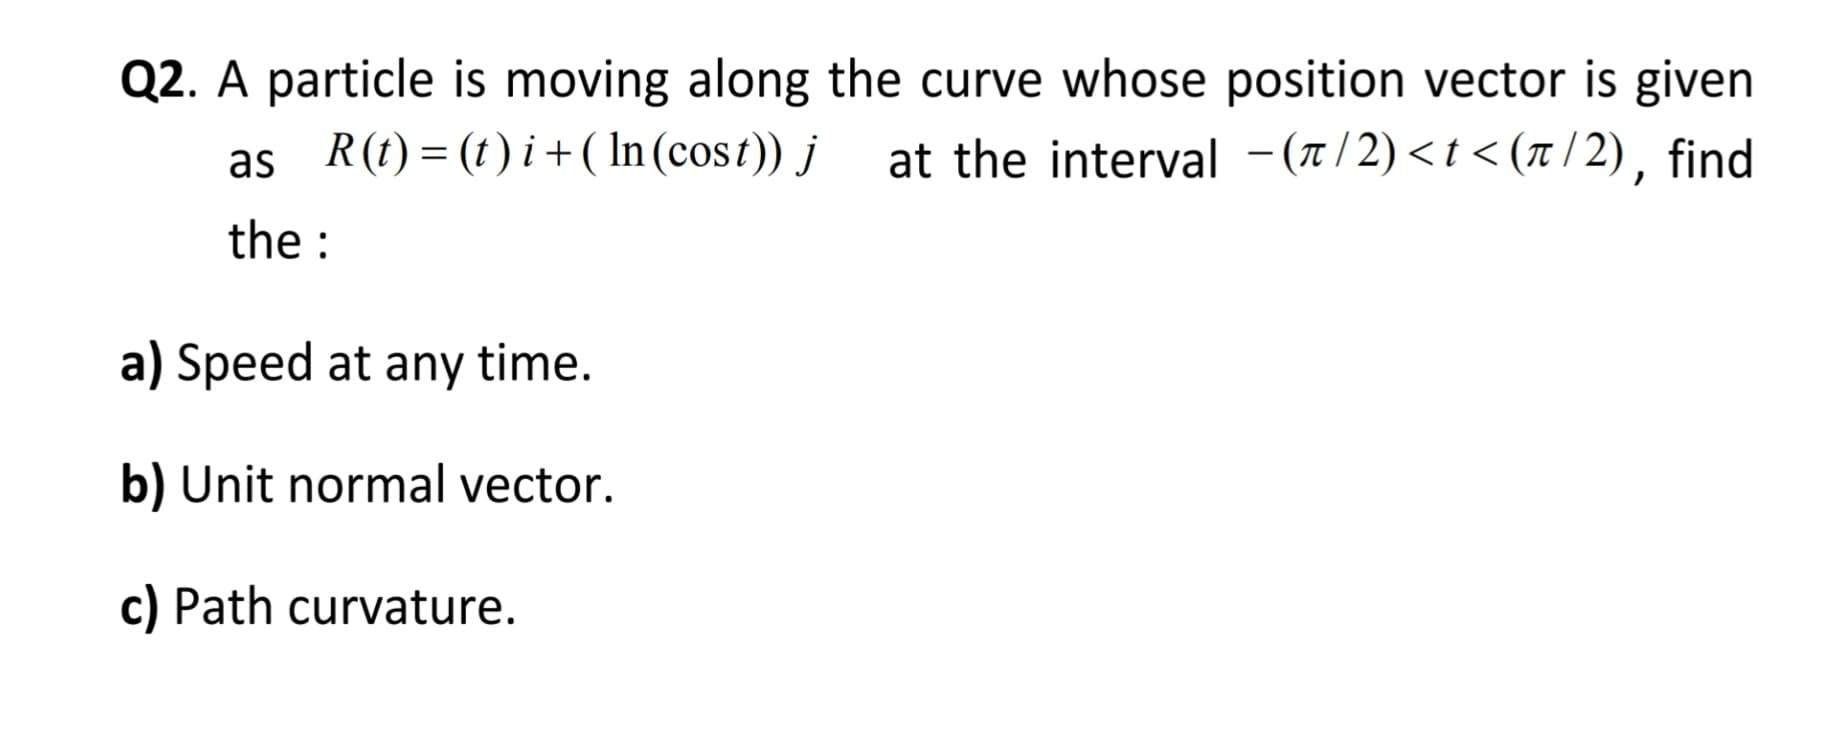 Q2. A particle is moving along the curve whose position vector is given
as R(t) = (1) i + ( In (cost)) j
at the interval -(1/2)<t < (x/ 2), find
the :
a) Speed at any time.
b) Unit normal vector.
c) Path curvature.
